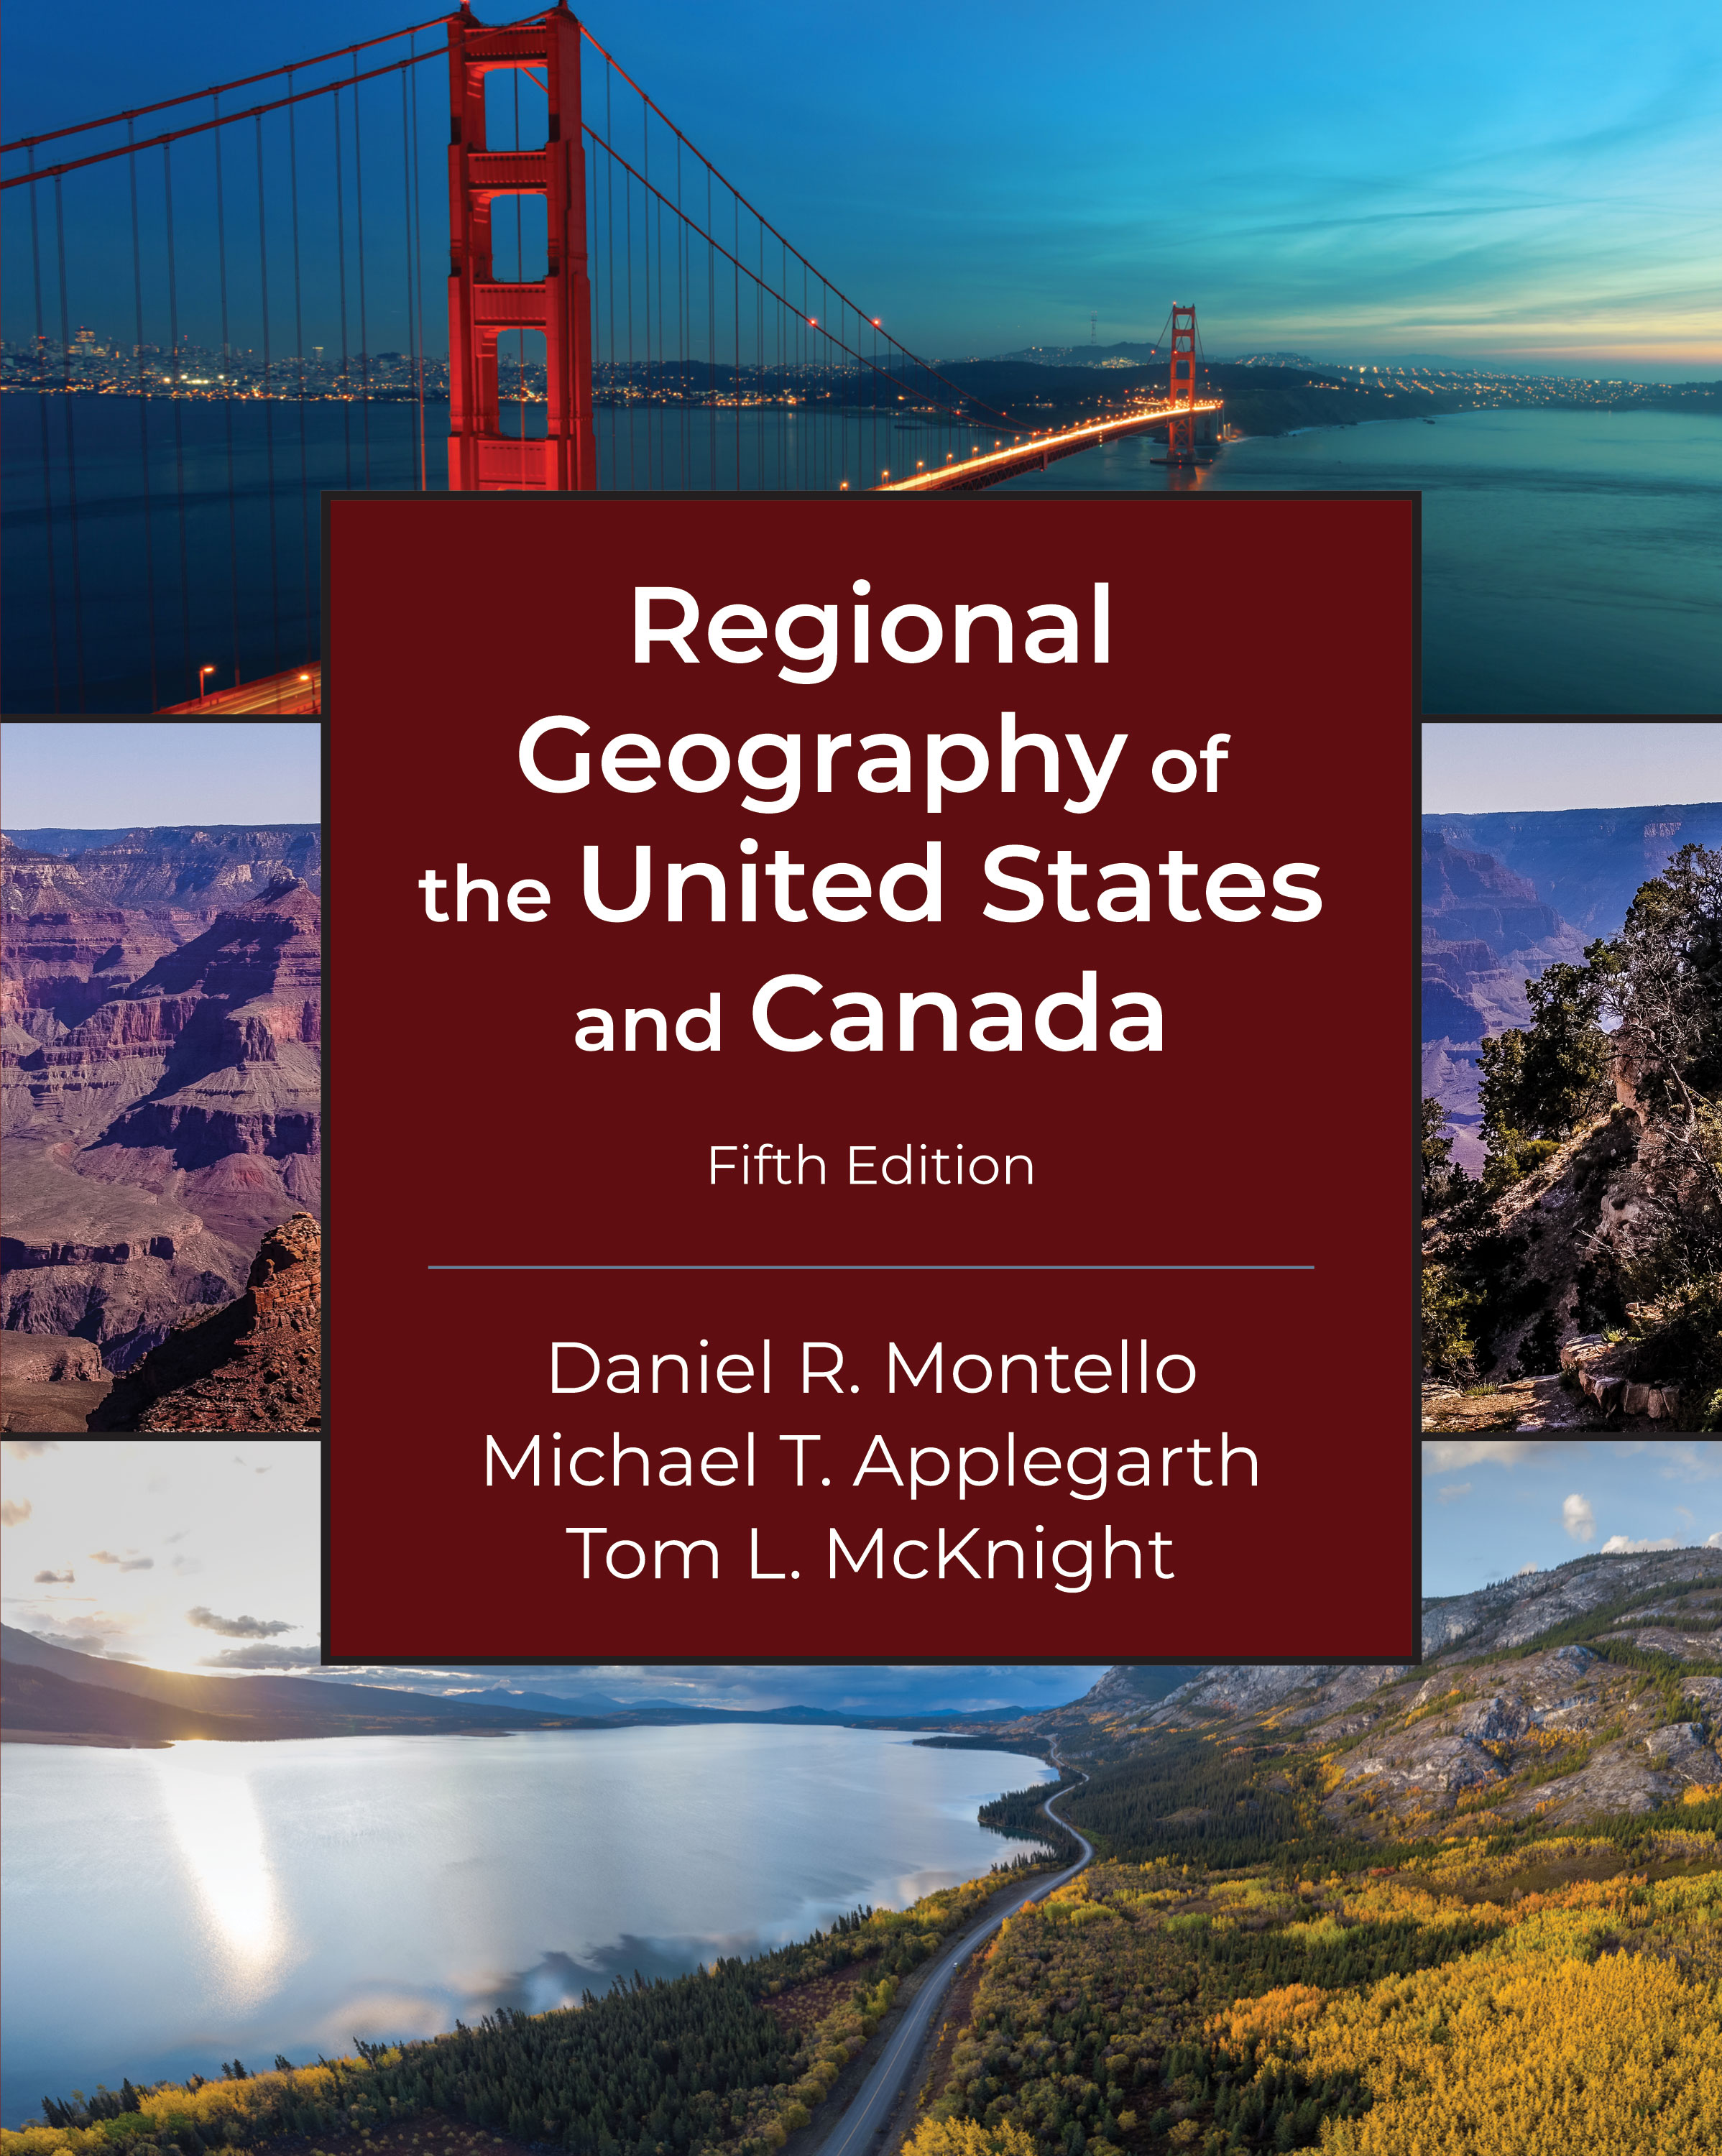 Regional Geography of the United States and Canada: Fifth Edition by Daniel R. Montello, Michael T. Applegarth, Tom L. McKnight